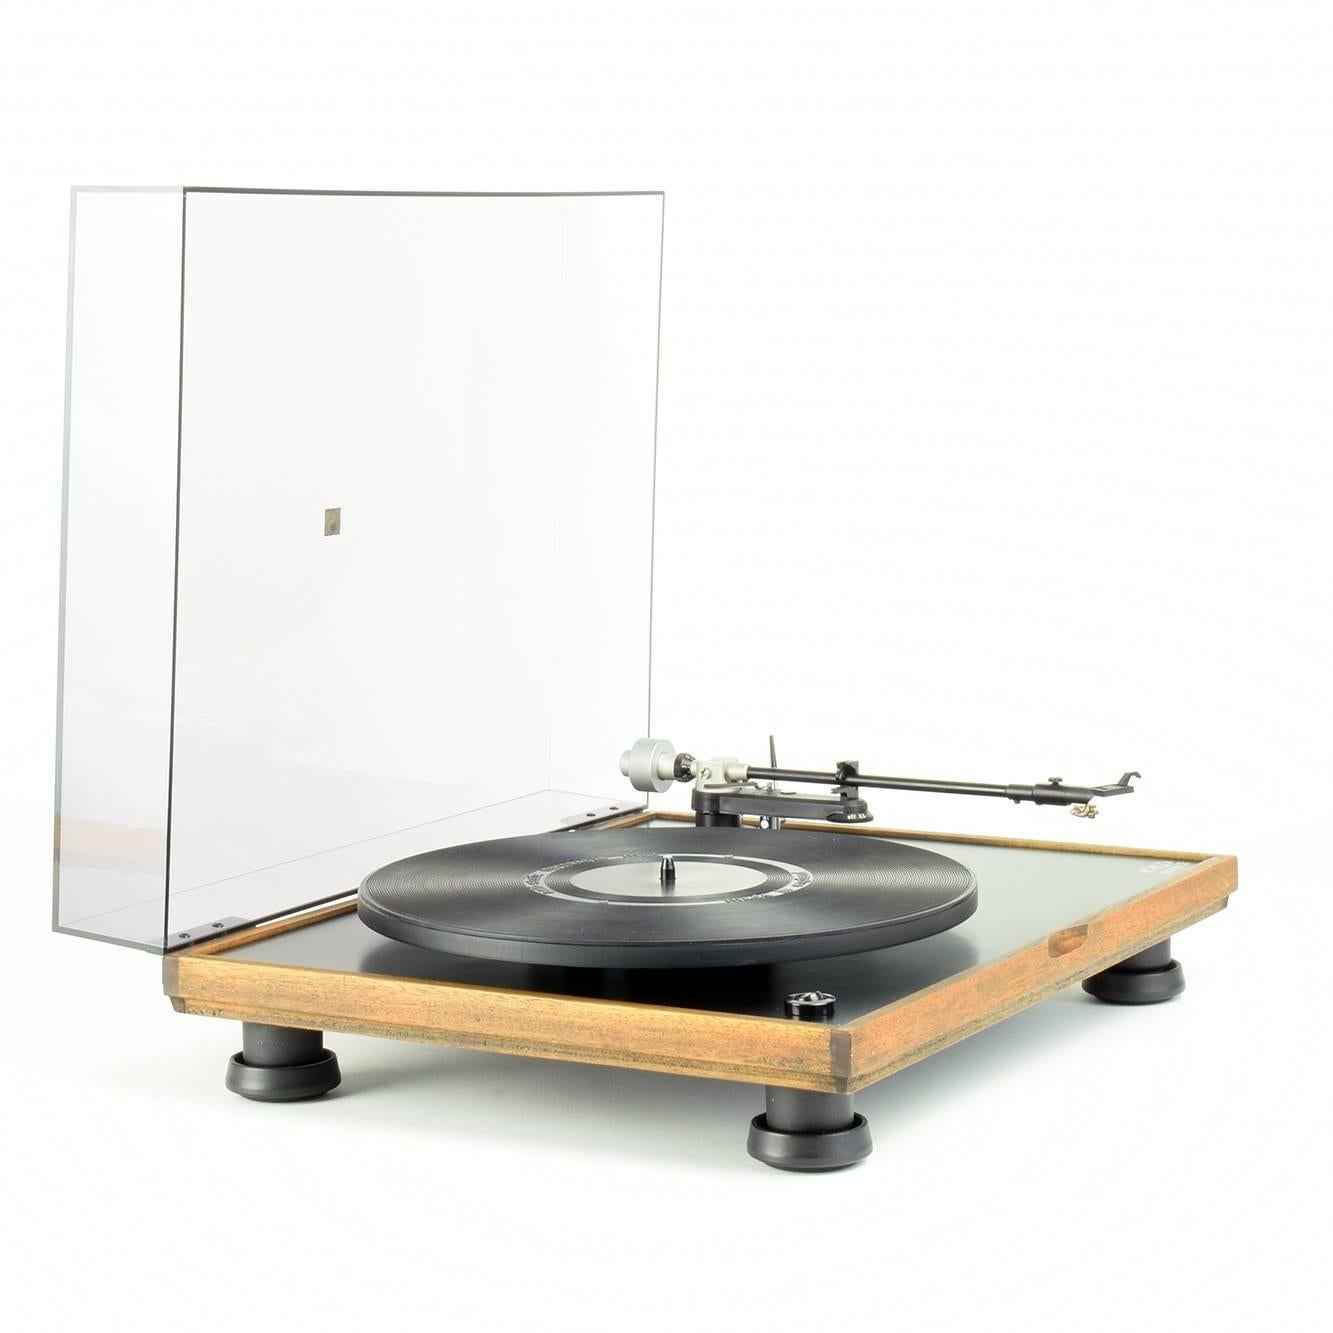 Rega research Ltd, UK.
Rega Planar two turntable with ADC ALT-1 tonearm.

Black laminated plinth with teak surround, glass platter, acrylic removable lid.

Excellent fully working condition.

Currently shown without cartridge or stylus as the